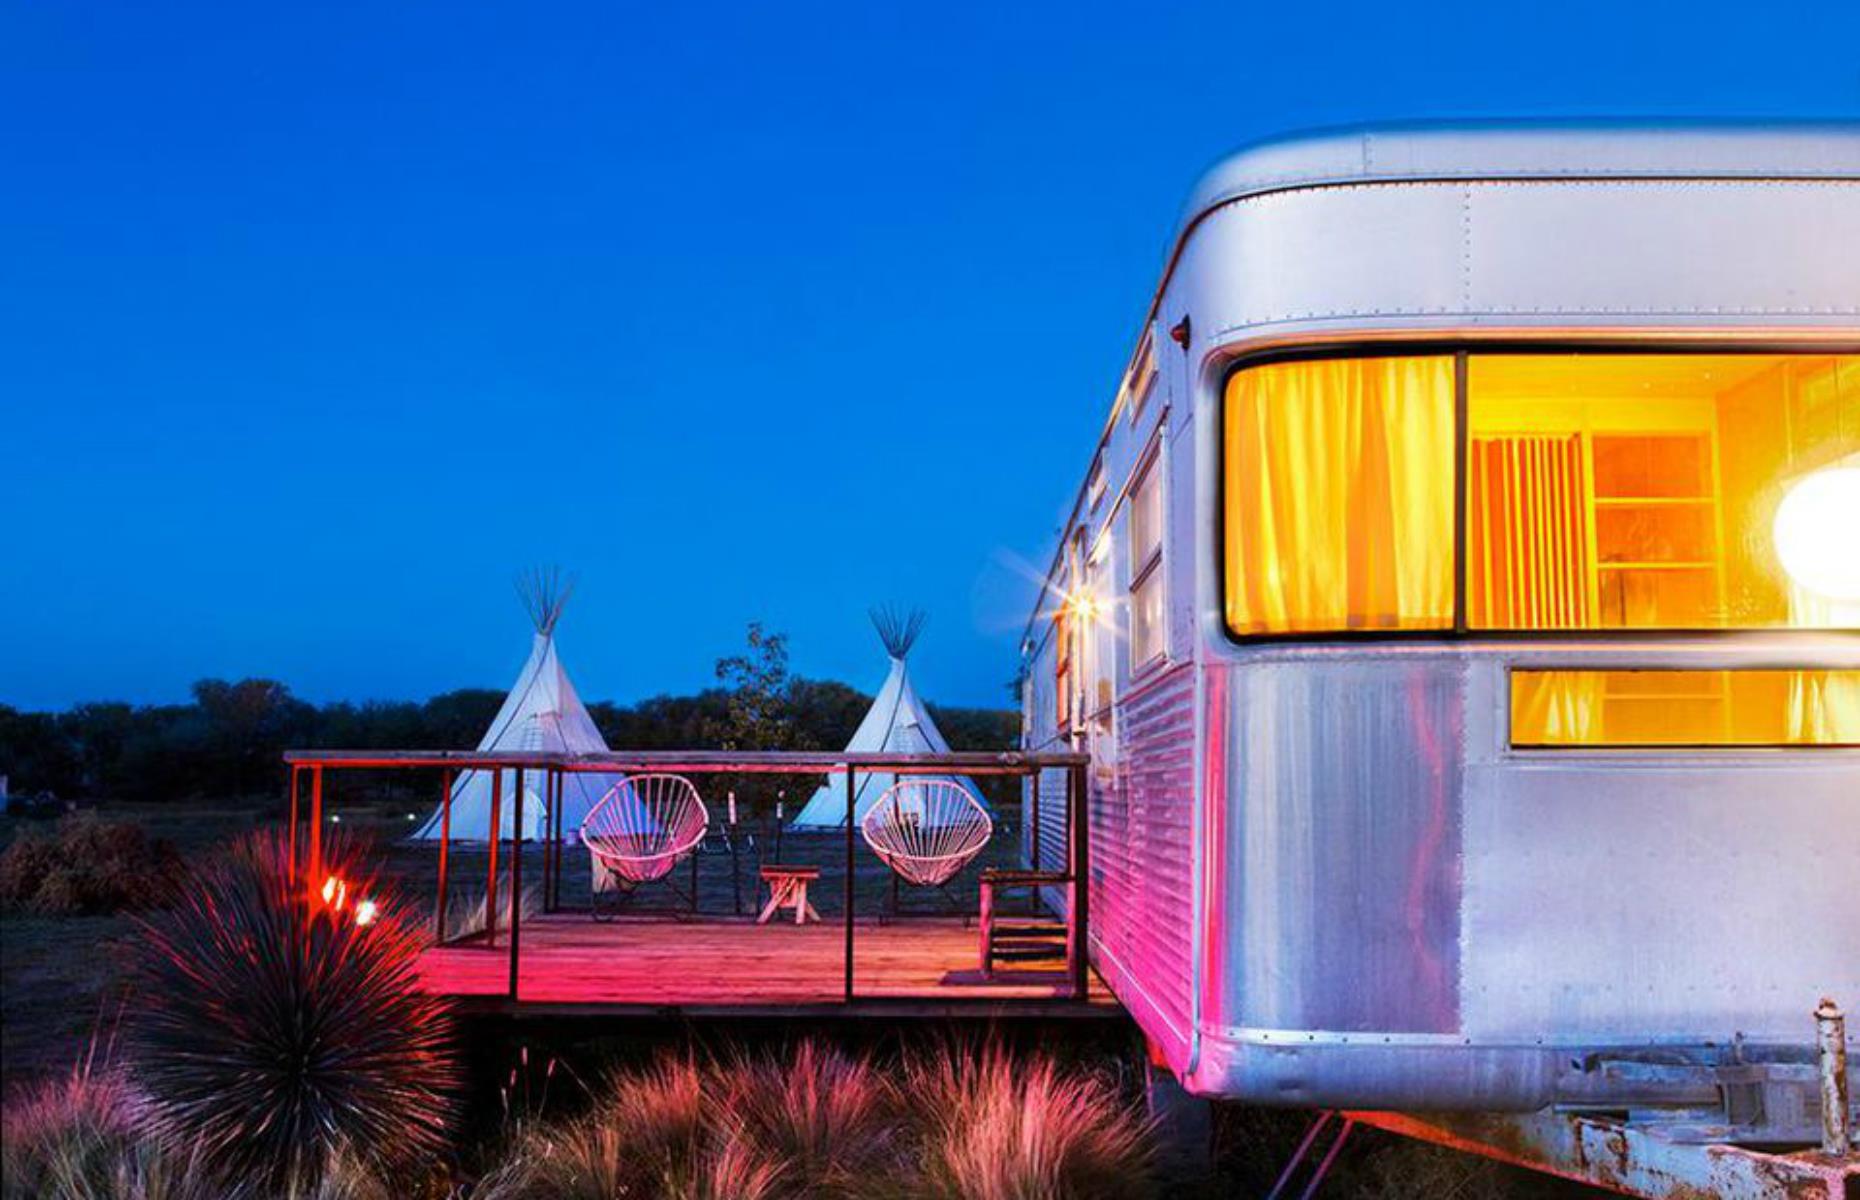 <p>Marfa, Texas, is fast becoming an arts hub and bohemian campsite El Cosmico offers some quirky accommodation. This sizeable <a href="https://elcosmico.com/">Airstream</a> contains a king and twin bed, shower, AC/heater and its own private deck. While there, get involved in a whole host of artistic and creative workshops, from cooking to songwriting. </p>